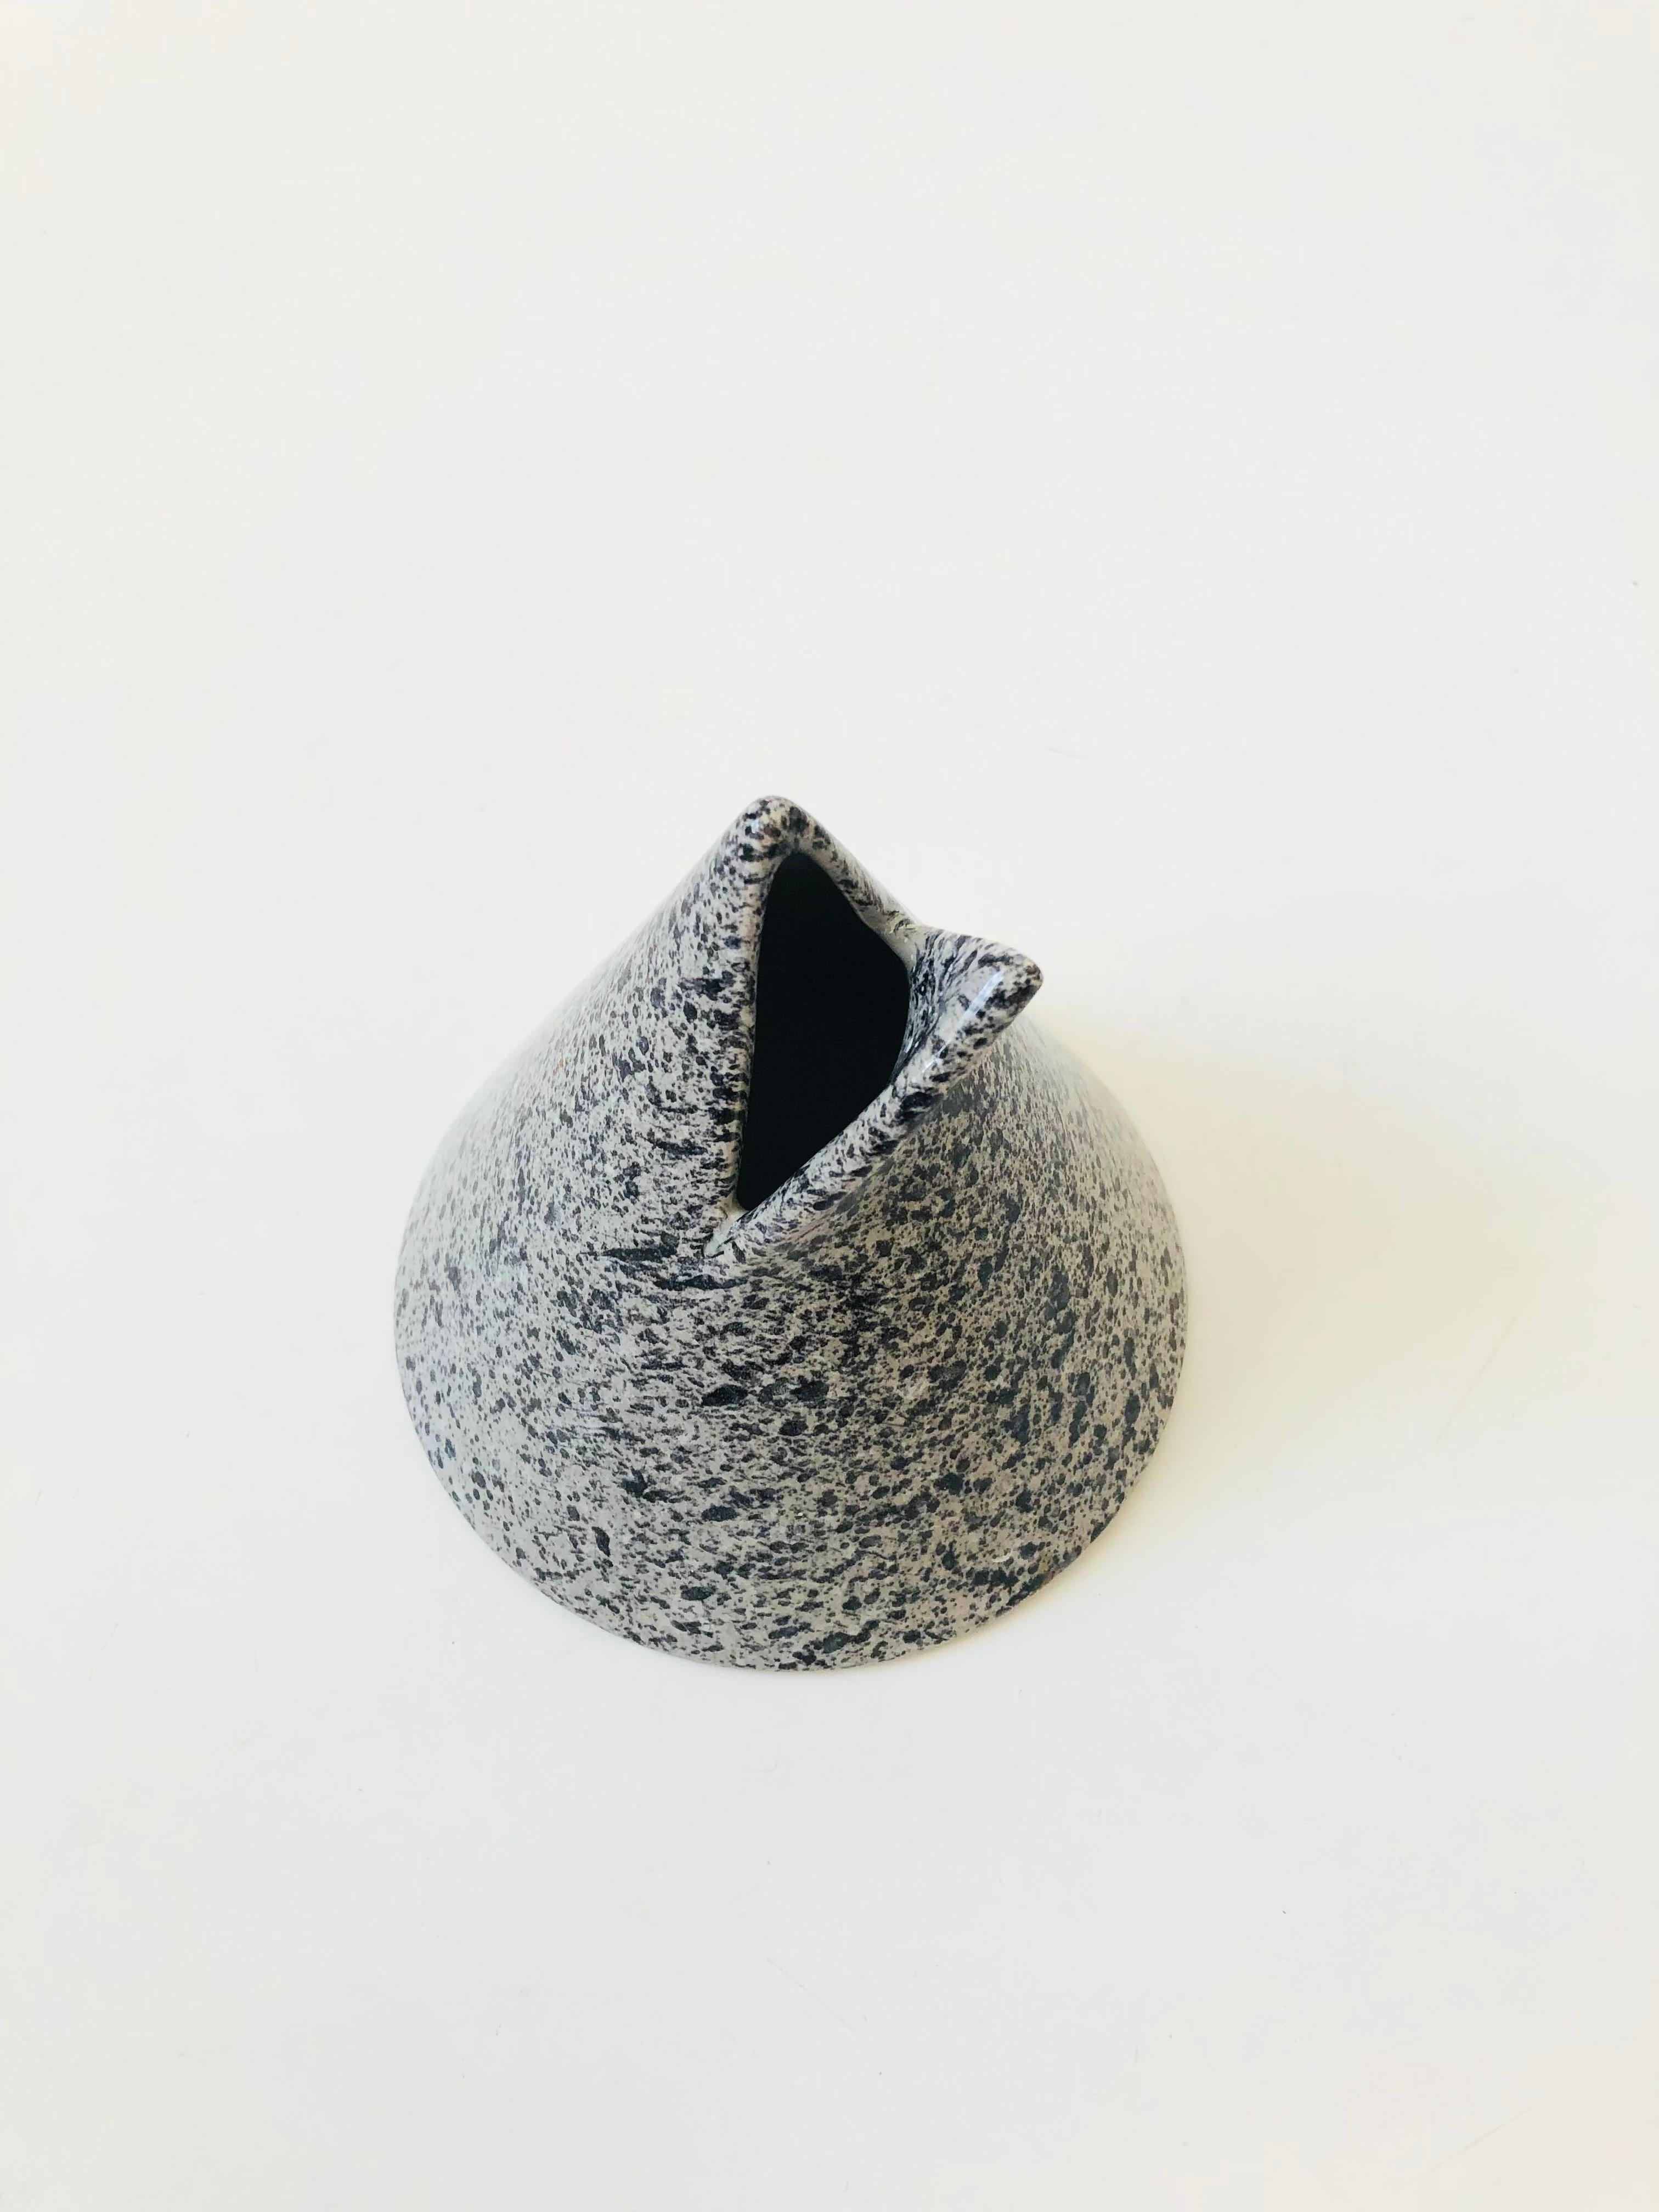 A vintage ceramic bud vase with a great postmodern design. Conical shape with a cut flap in the top that has been pulled back to create the vase opening. Finish in a glossy speckled gray glaze. Designed by Helena Uglow for Mikasa, Japan.

